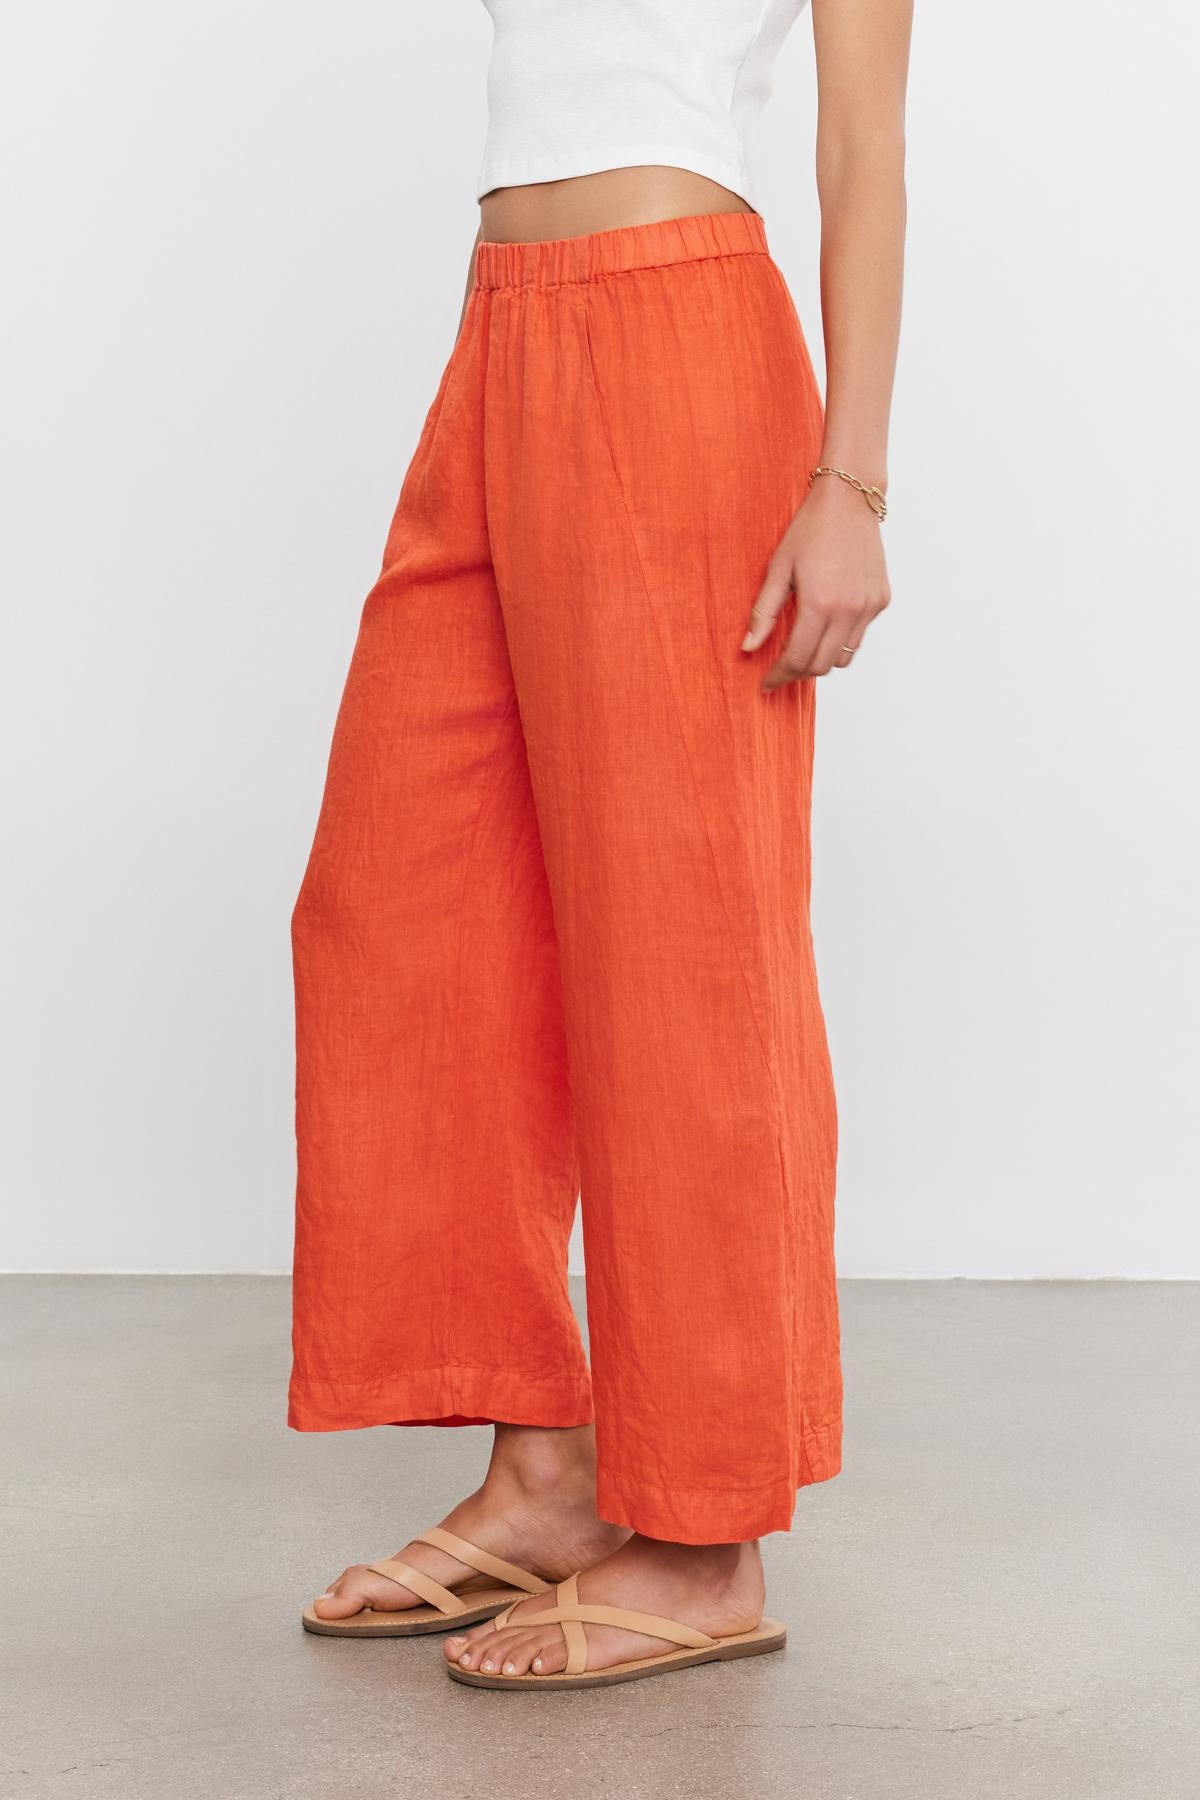 A person is wearing Velvet by Graham & Spencer LOLA LINEN PANT, a white crop top, brown sandals, and a bracelet, standing sideways against a plain background.-36910043922625